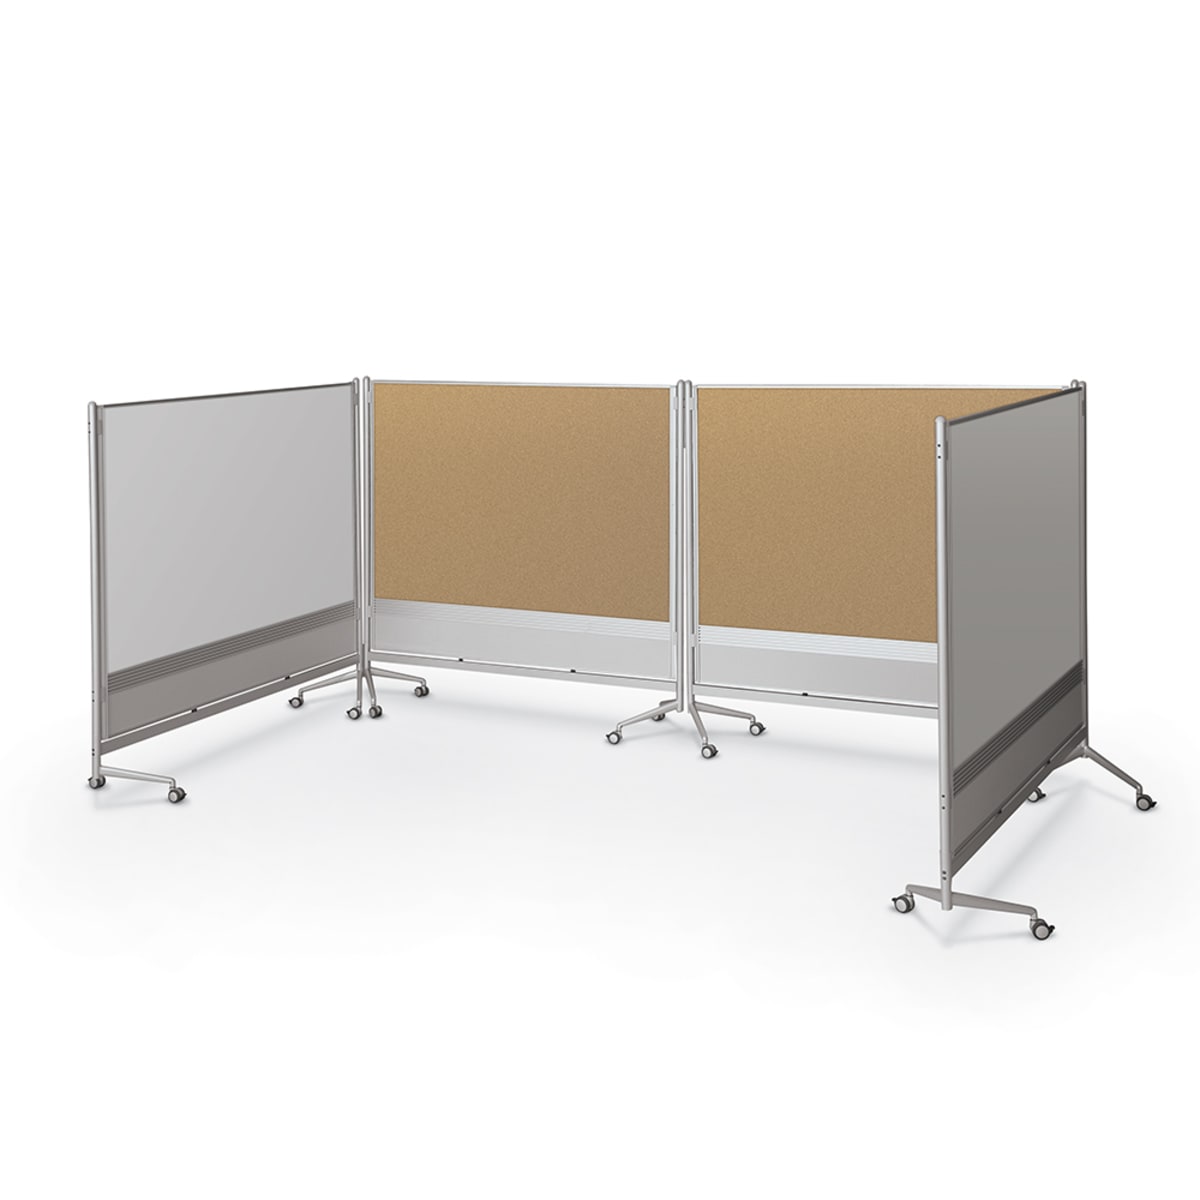 Mooreco Mobile Room Divider & Display Panel Dura-Rite - Both Sides - 6'H x 6'W (Mooreco 661AG-HH) - SchoolOutlet